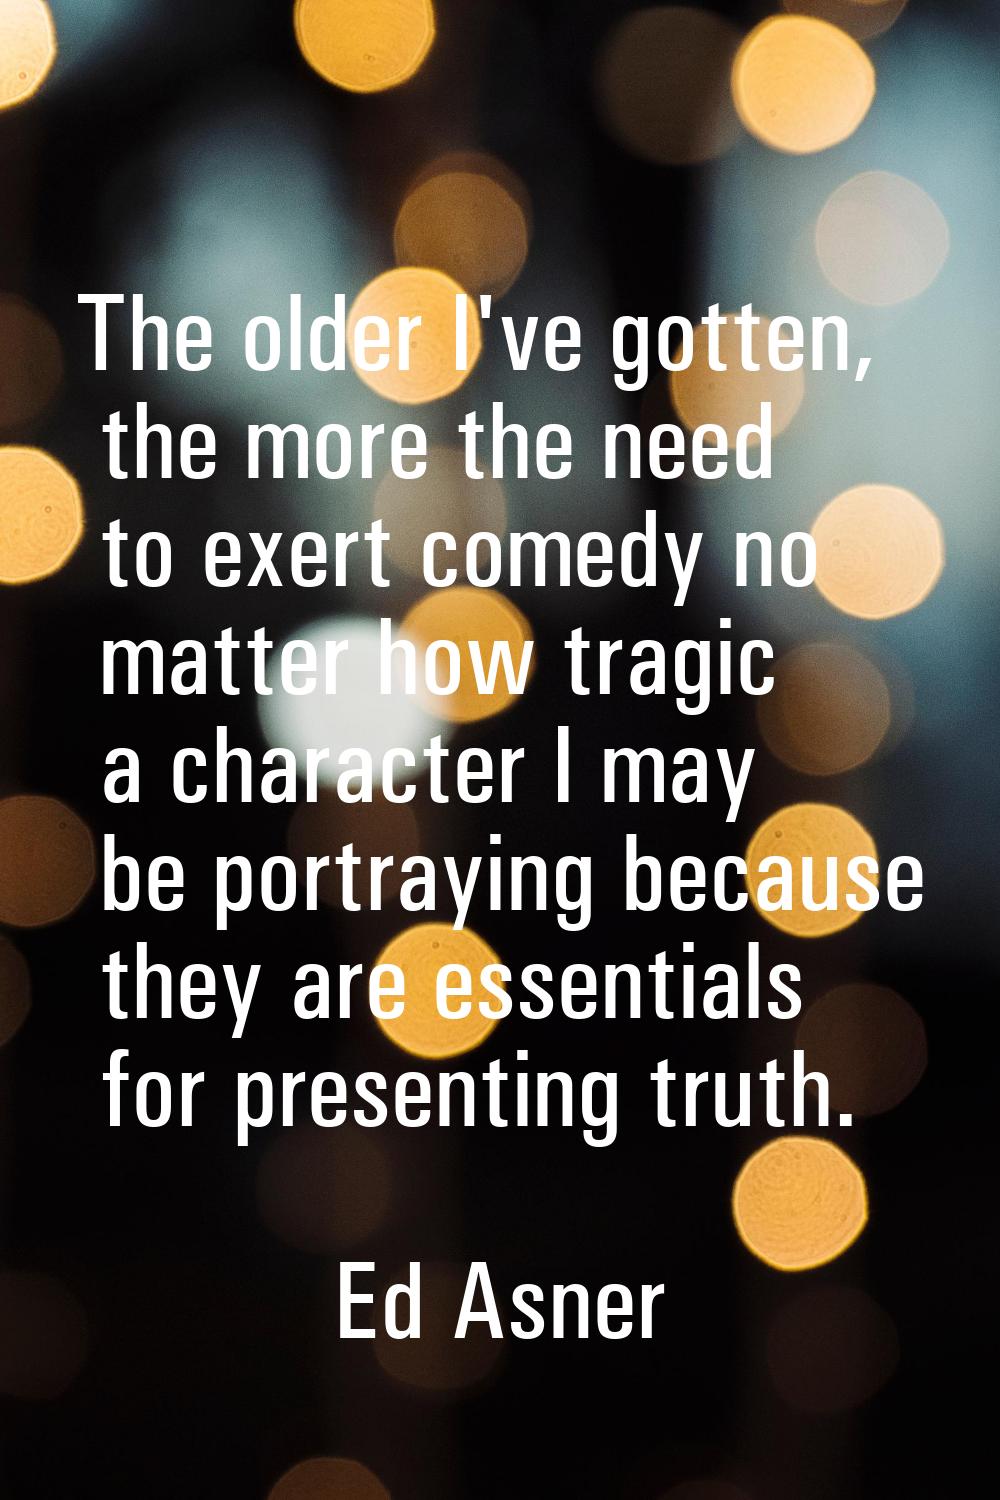 The older I've gotten, the more the need to exert comedy no matter how tragic a character I may be 